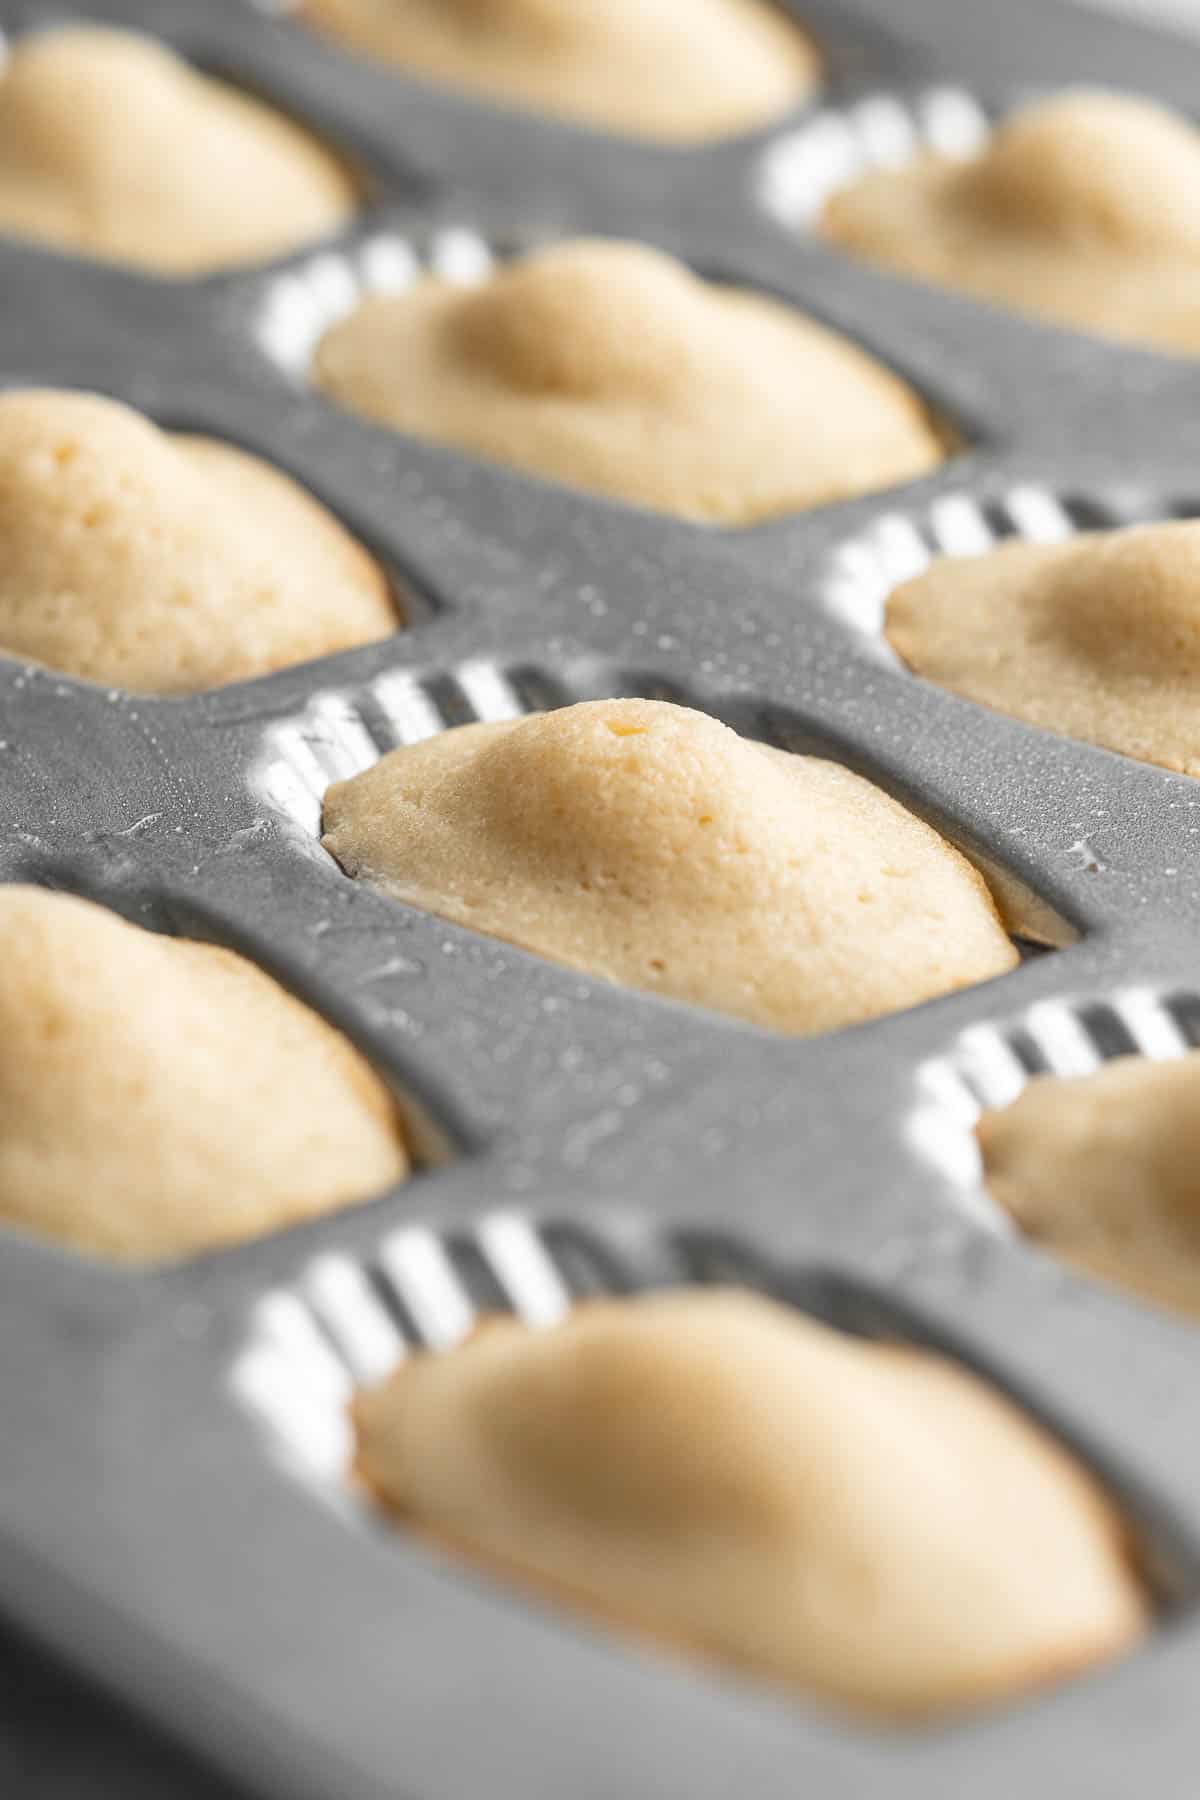 Classic Madeleines are soft spongy mini cakes with a signature shell shape and dusting of sugar on top. Making French butter cakes is easier than you think! | aheadofthyme.com